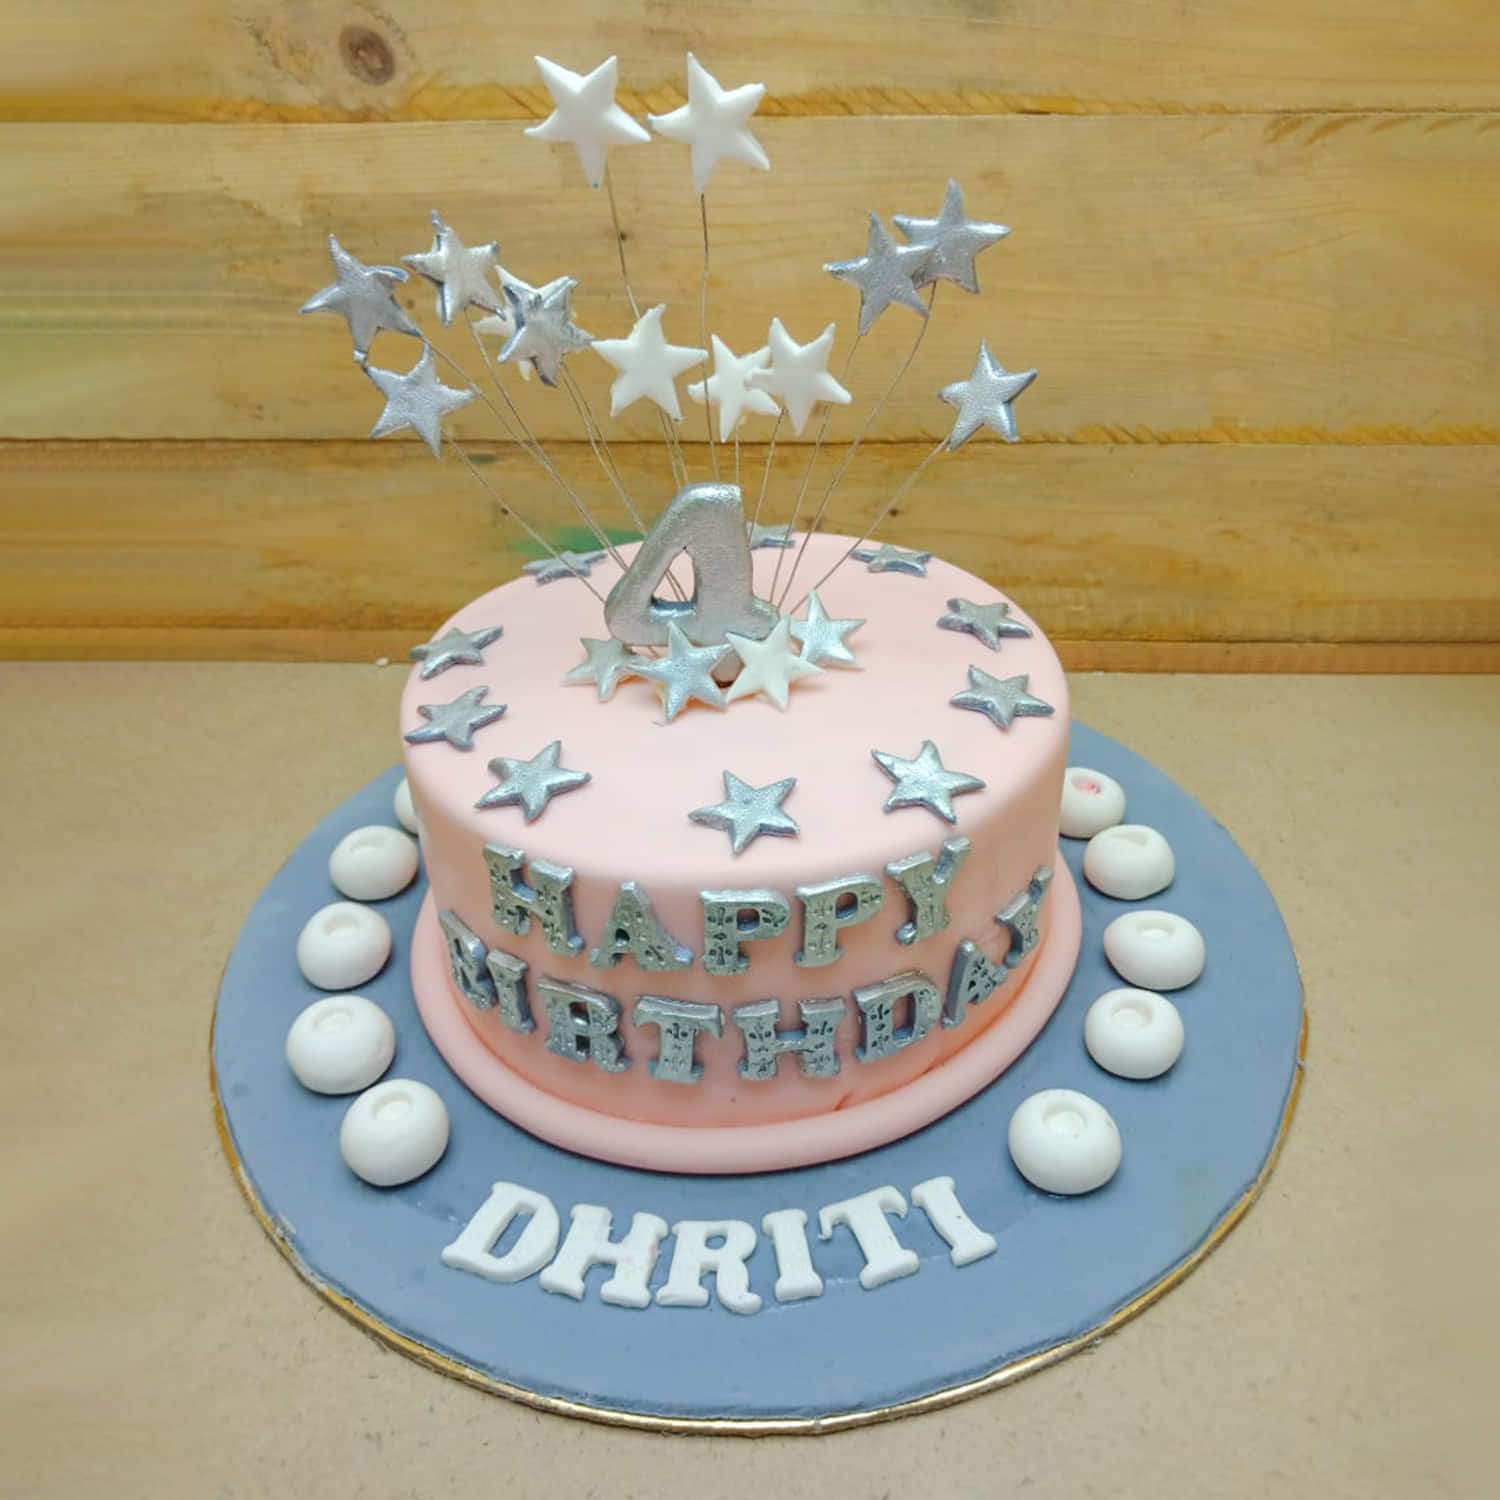 Blue sky - Decorated Cake by Tortalie - CakesDecor